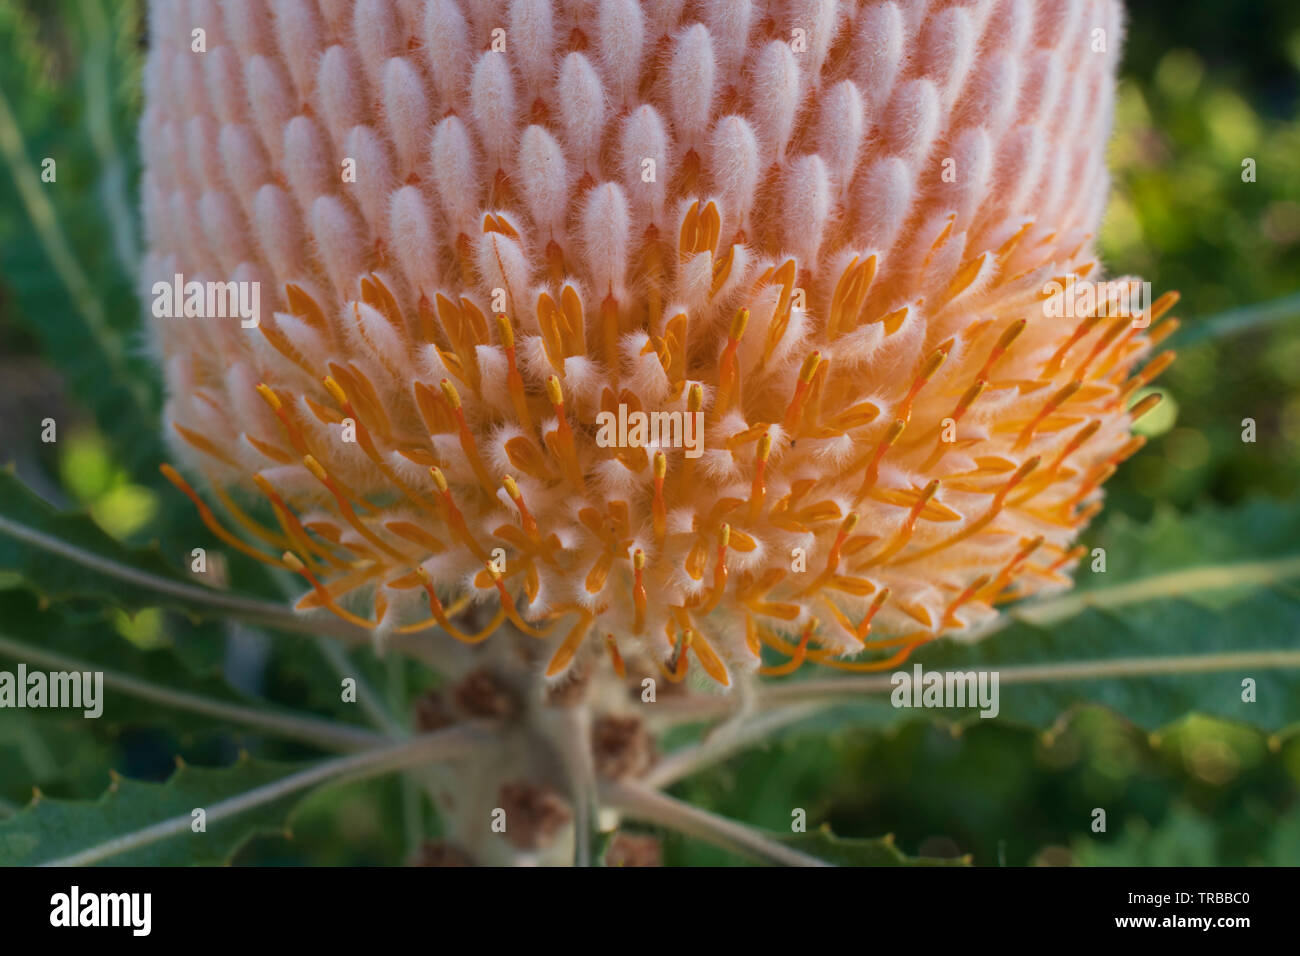 Flower spike of Banksia prionotes, with anthesis (opening of individual flowers) gradually moving up from base, giving classical 'acorn' shape. Stock Photo